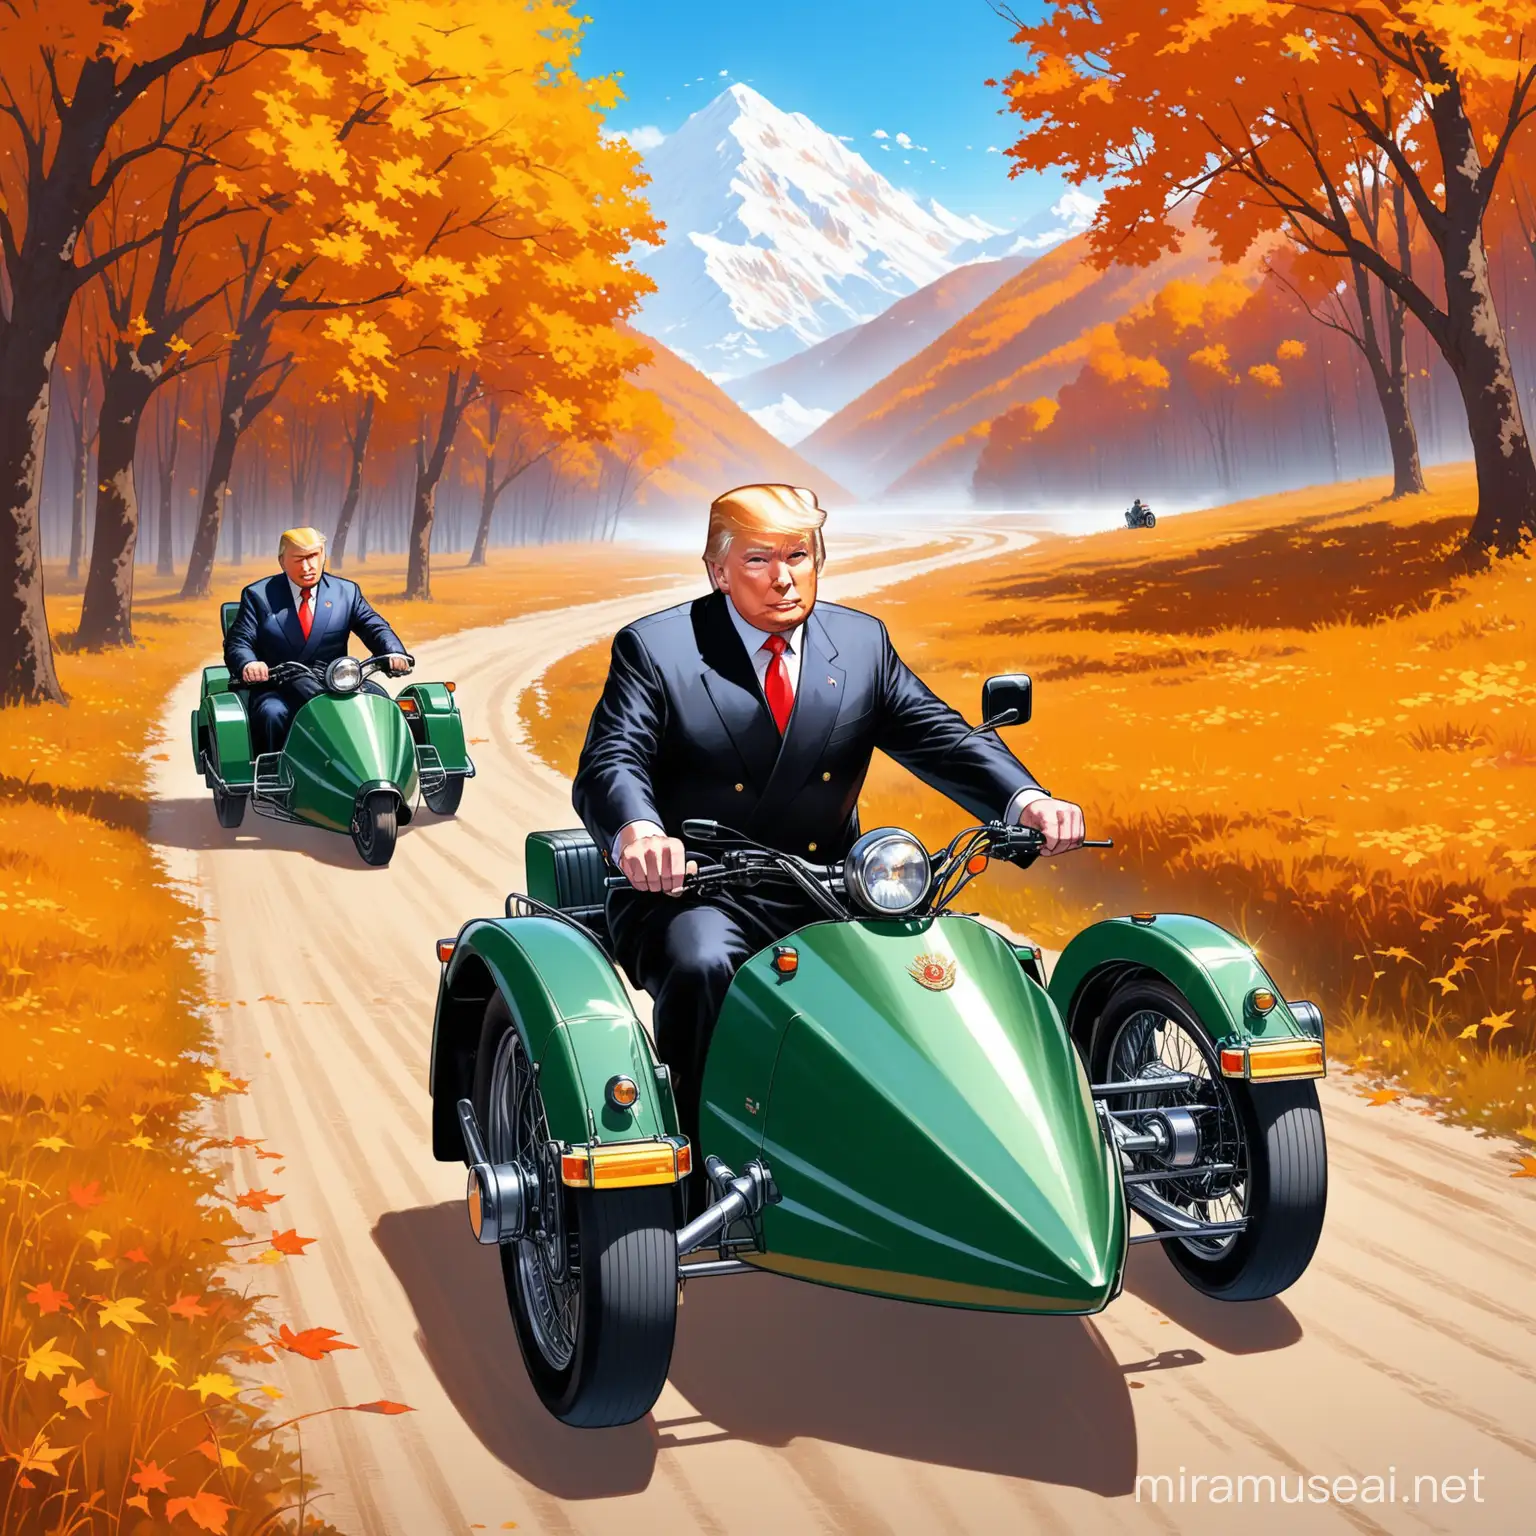 future 2050 year, higher moutain position ,one 65years old real face putin  wear black  sleep robe and one putin   wear whiten sleep robe,  trump driving whiten huge 3 wheels Sidecar motorcycle  ,  soviet fareast dense higher grass , noroad, everywhere grass, 
 autumn , noon , lesser trees, moutain far,Fewer trees，